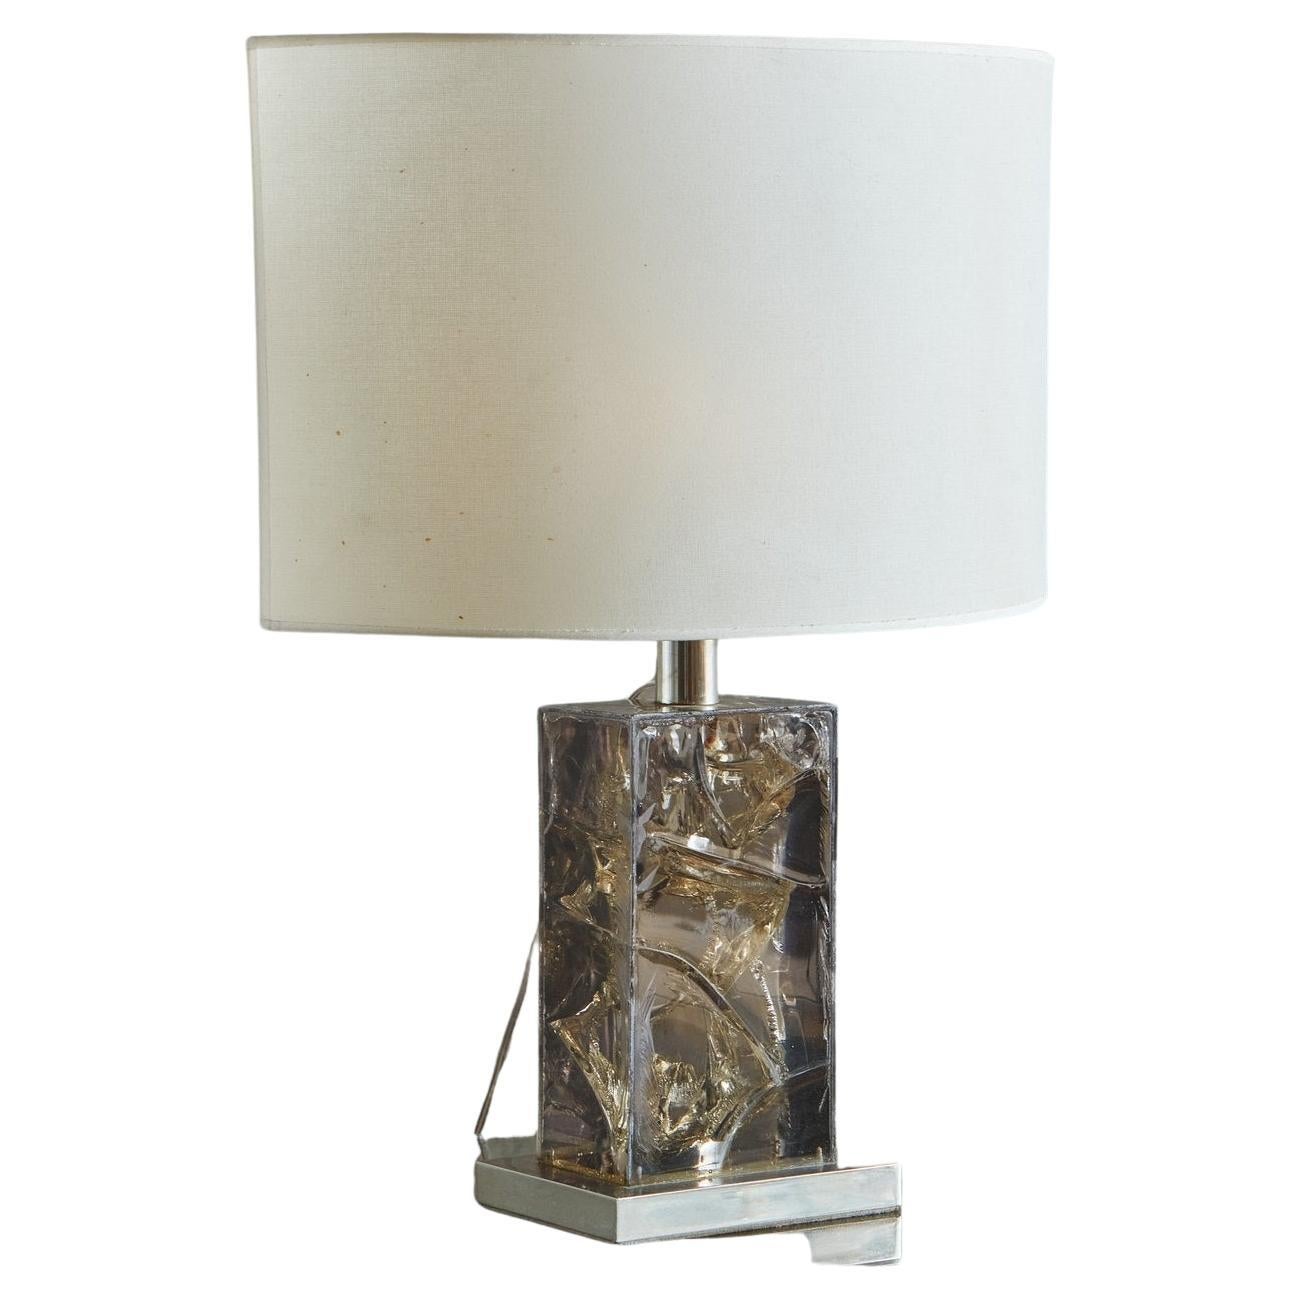 Smoked Fractured Resin + Chrome Table Lamp, France 20th Century